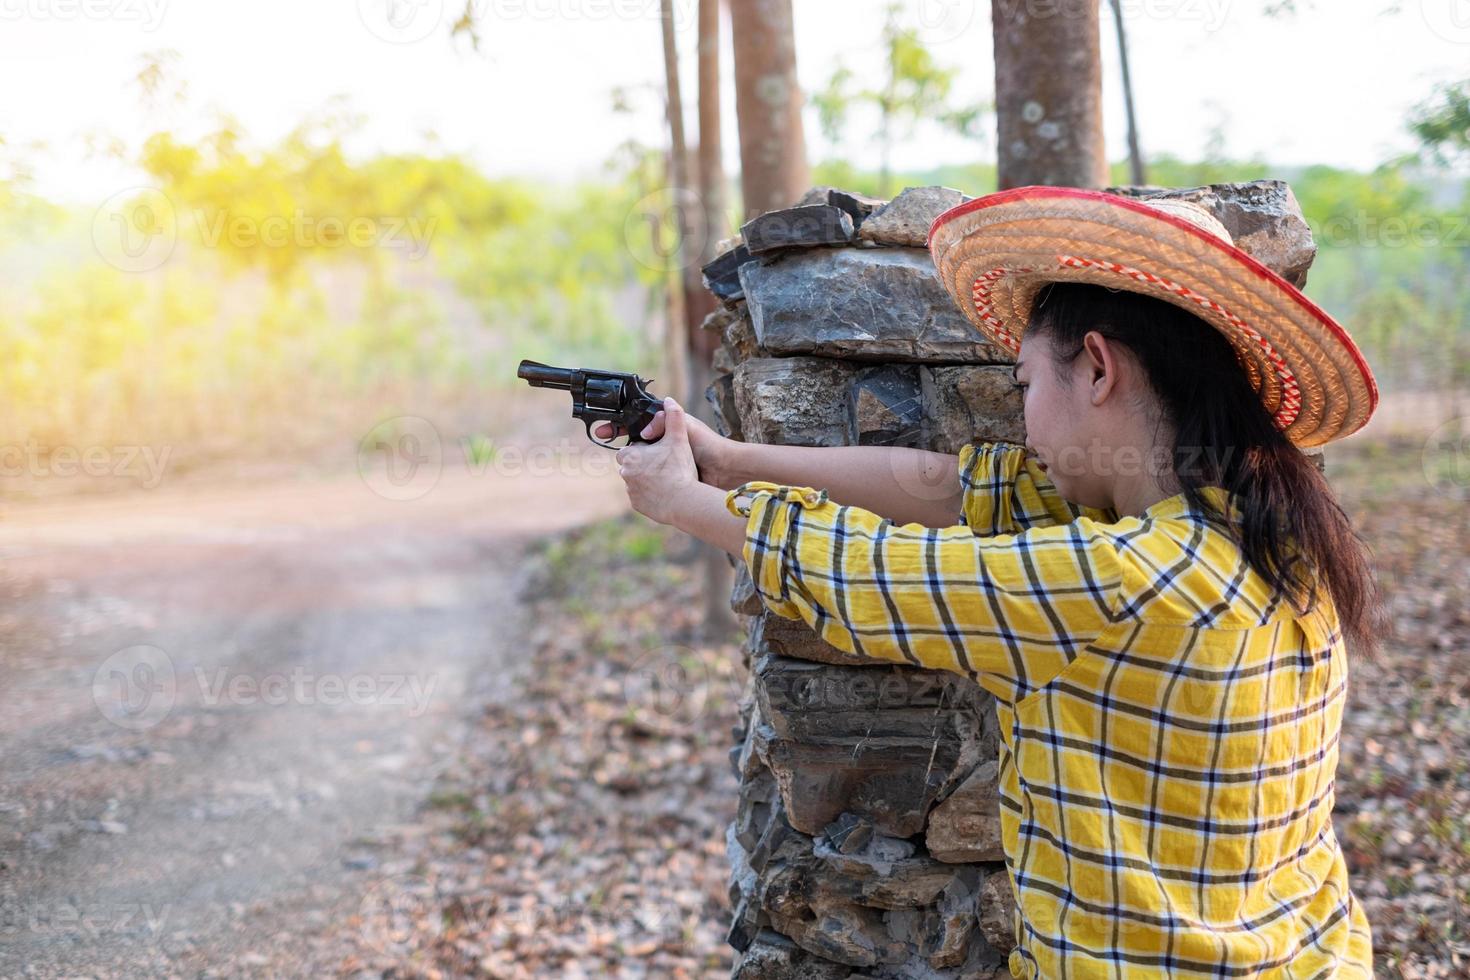 Portrait the farmer asea woman wearing a hat at the shooting shot from old revolver gun in the farm, Young girl sitting in the attitude of aiming and looking through the sight handgun photo